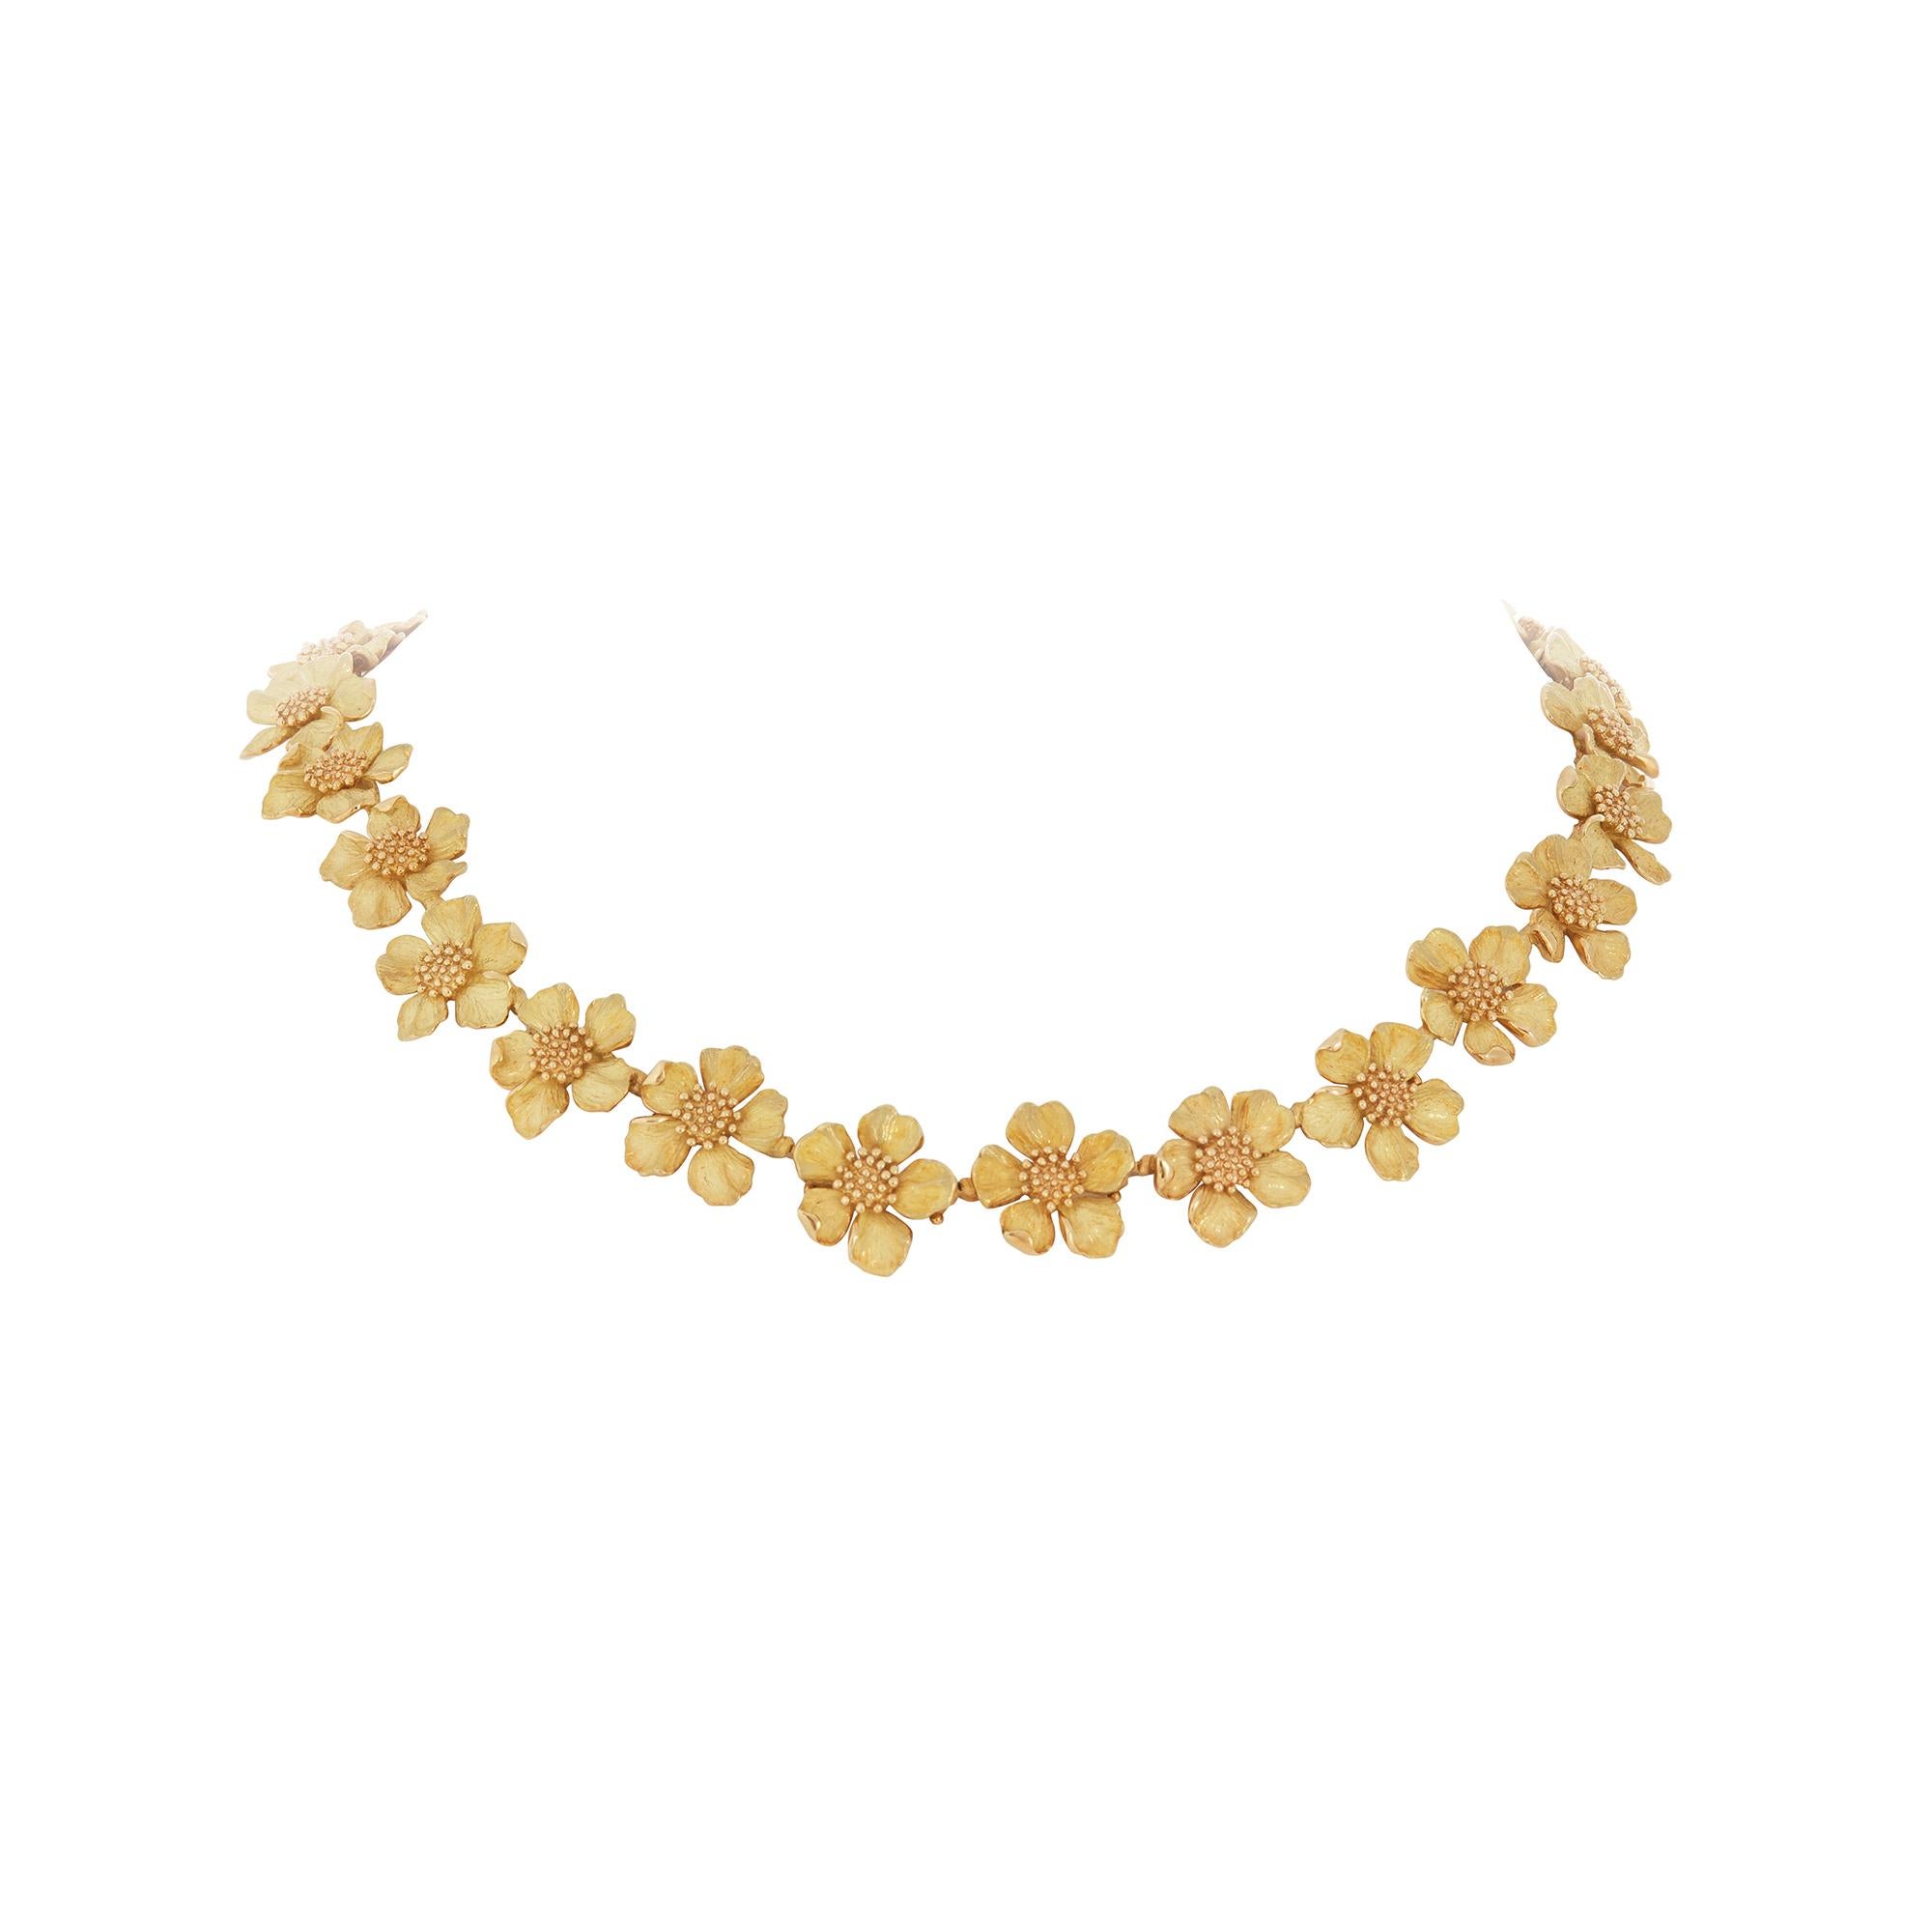 Authentic Tiffany & Co. necklace from the iconic Dogwood Collection crafted in textured 18 karat yellow gold. A timeless classic featuring delicate floral links in the shape of dogwood flowers.  Signed Tiffany & Co., Tiffany Classics, 750. The